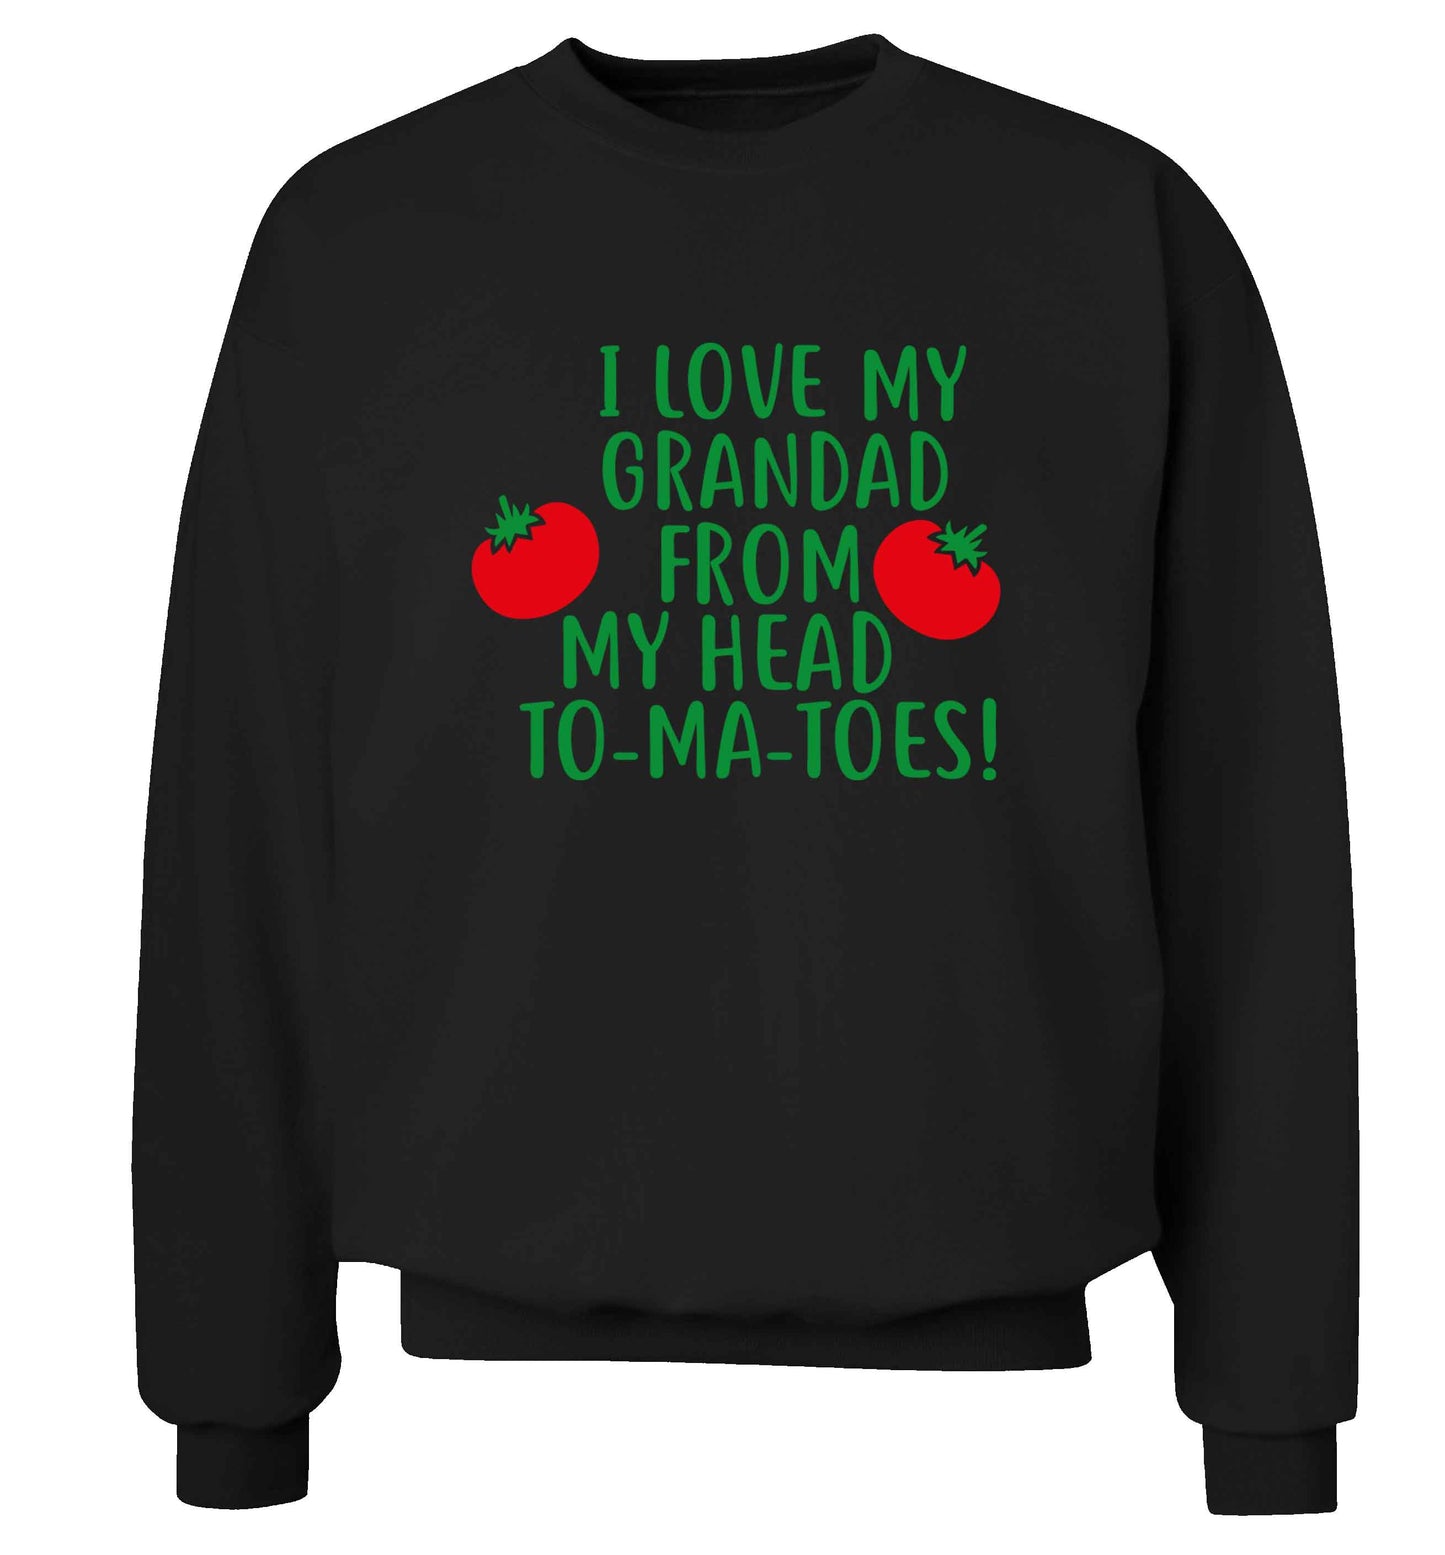 I love my grandad from my head To-Ma-Toes Adult's unisex black Sweater 2XL